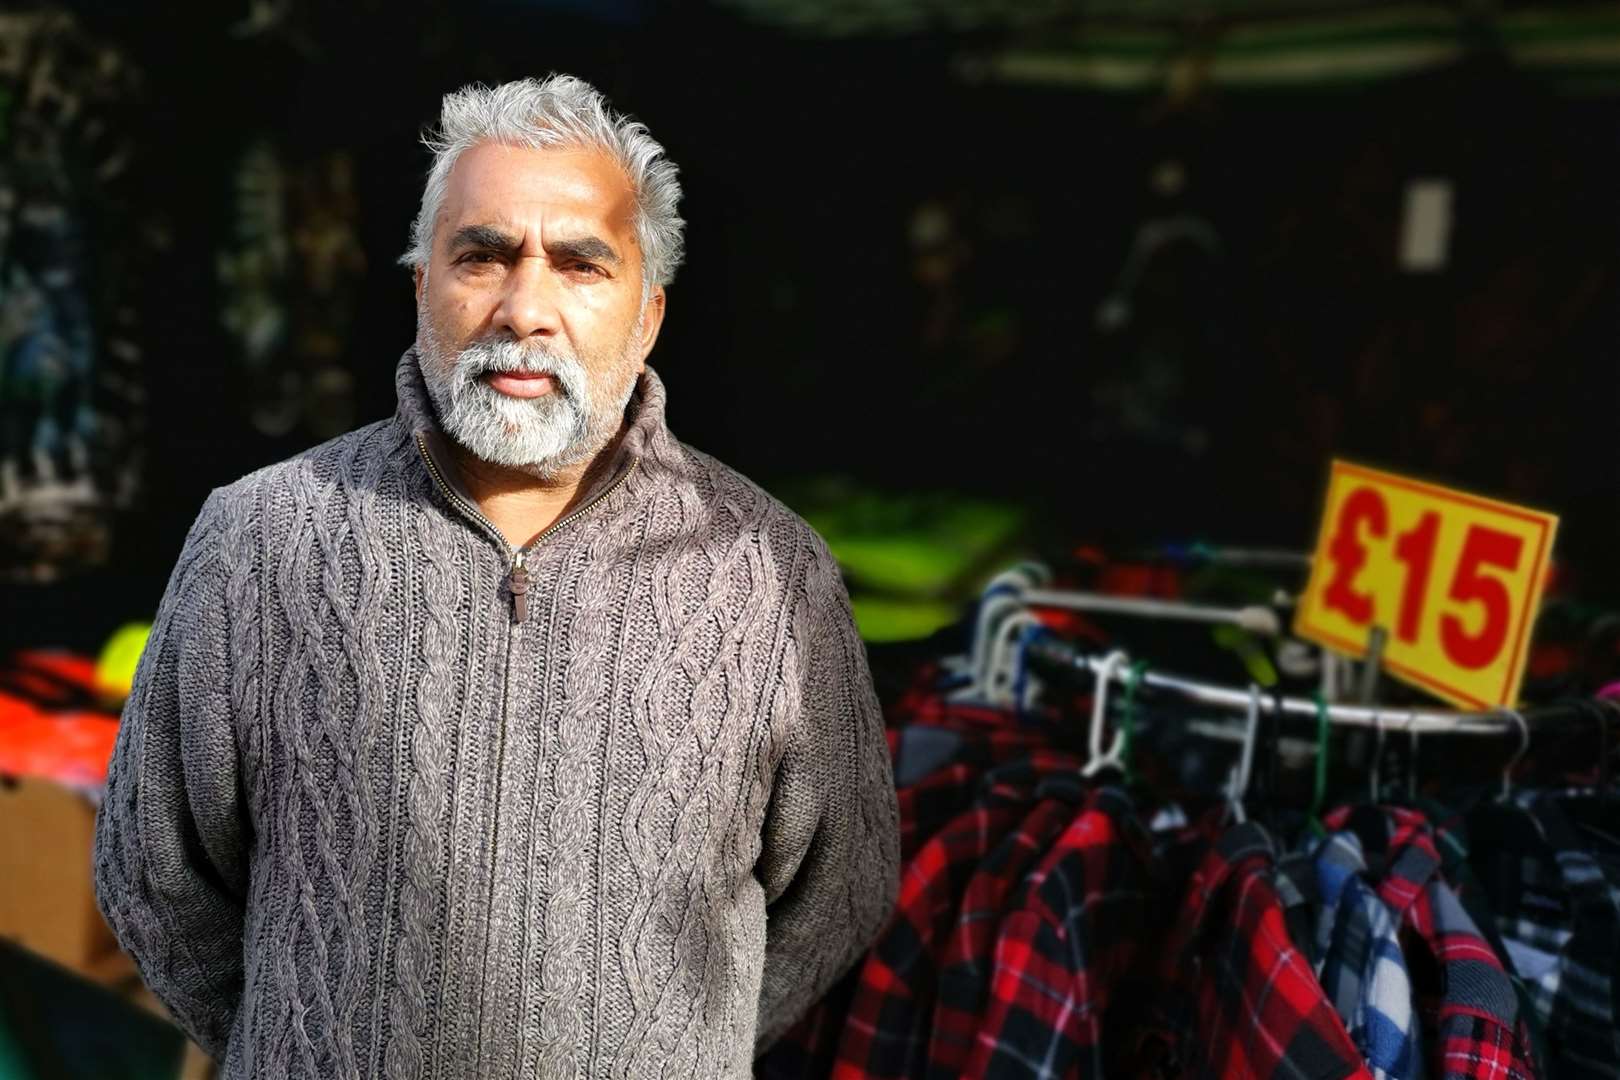 Paul Singh has been setting up his market stall in Dover for more than 20 years